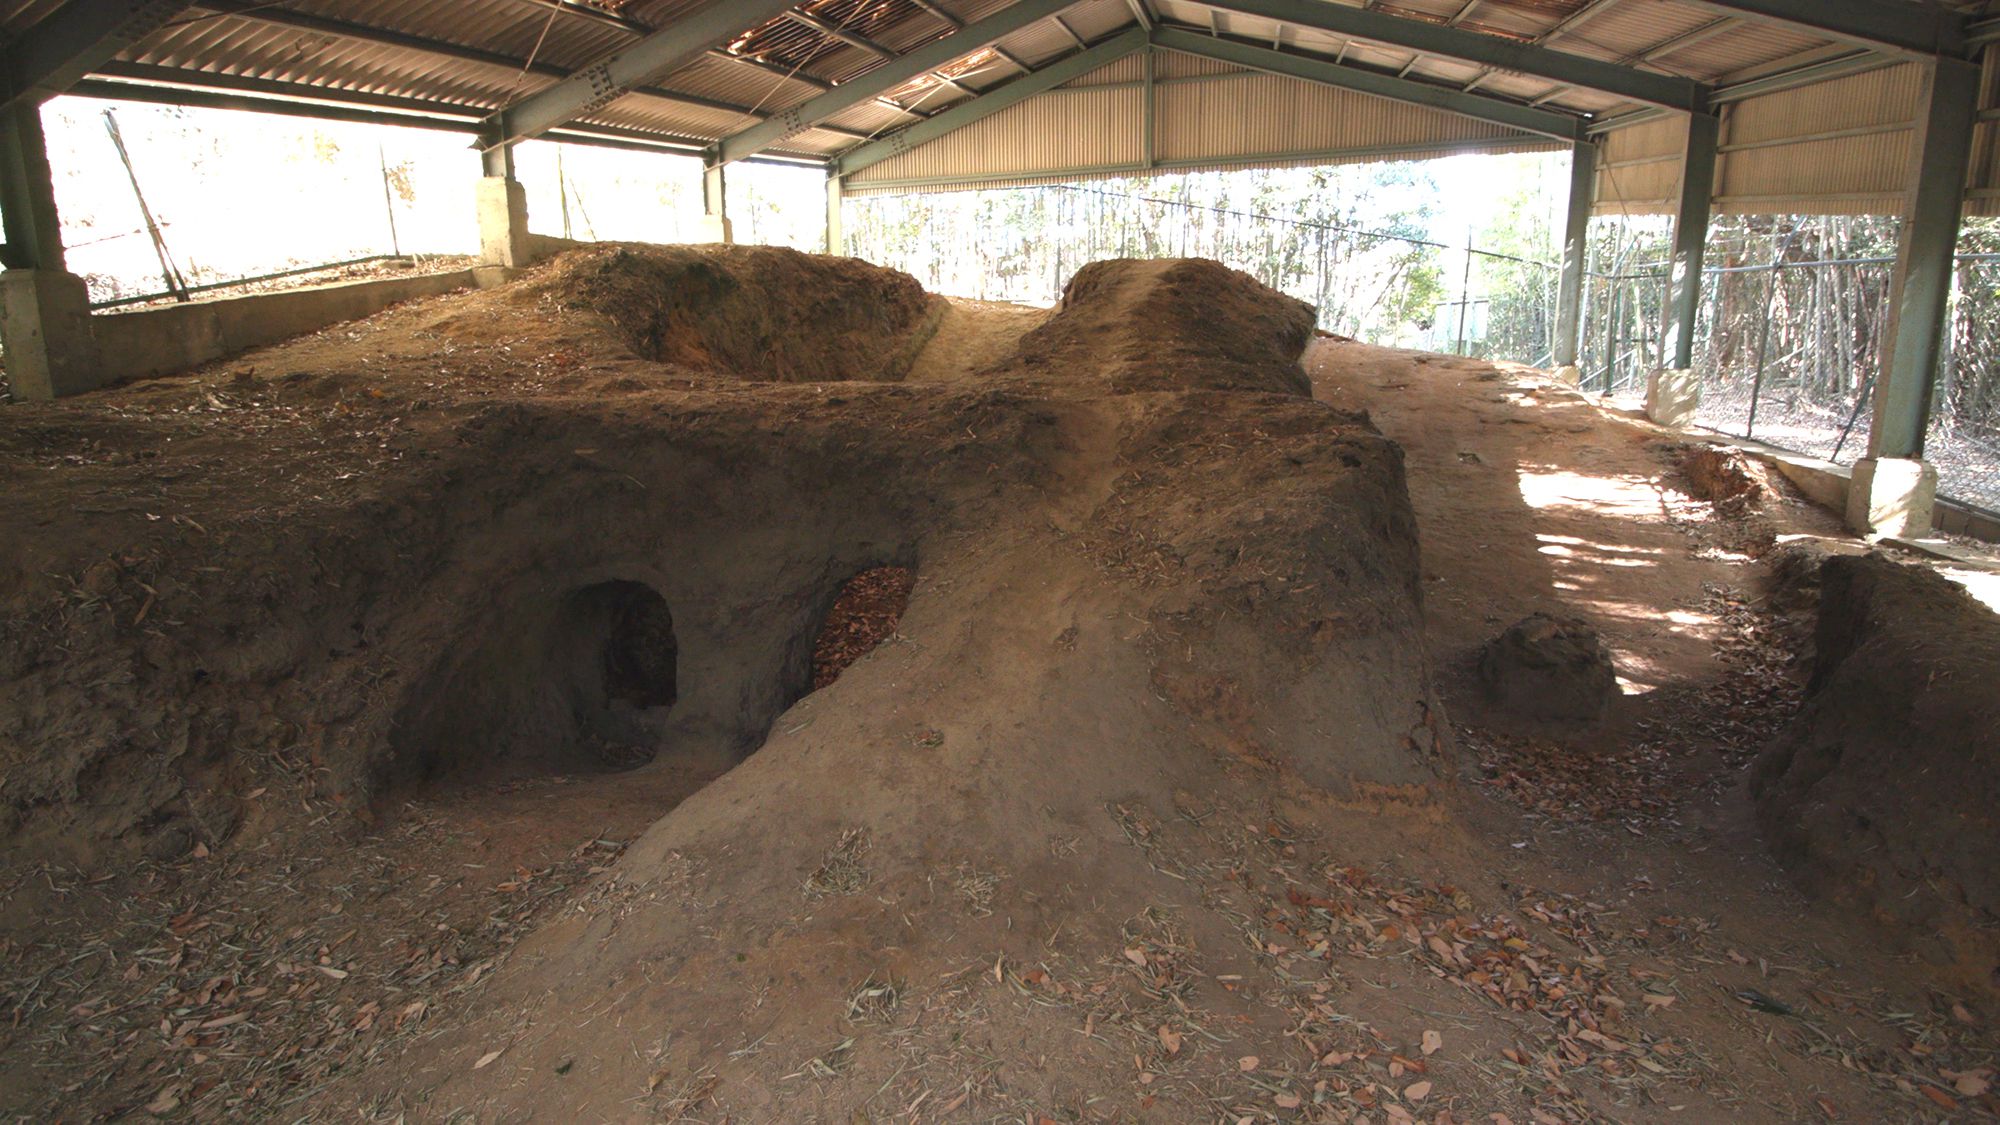 The Tokoname’s Kagoike Ancient Kiln. This Anagama (Cave Kiln) was used during the late Heian period. The kiln is built by digging out the soil of a slope.